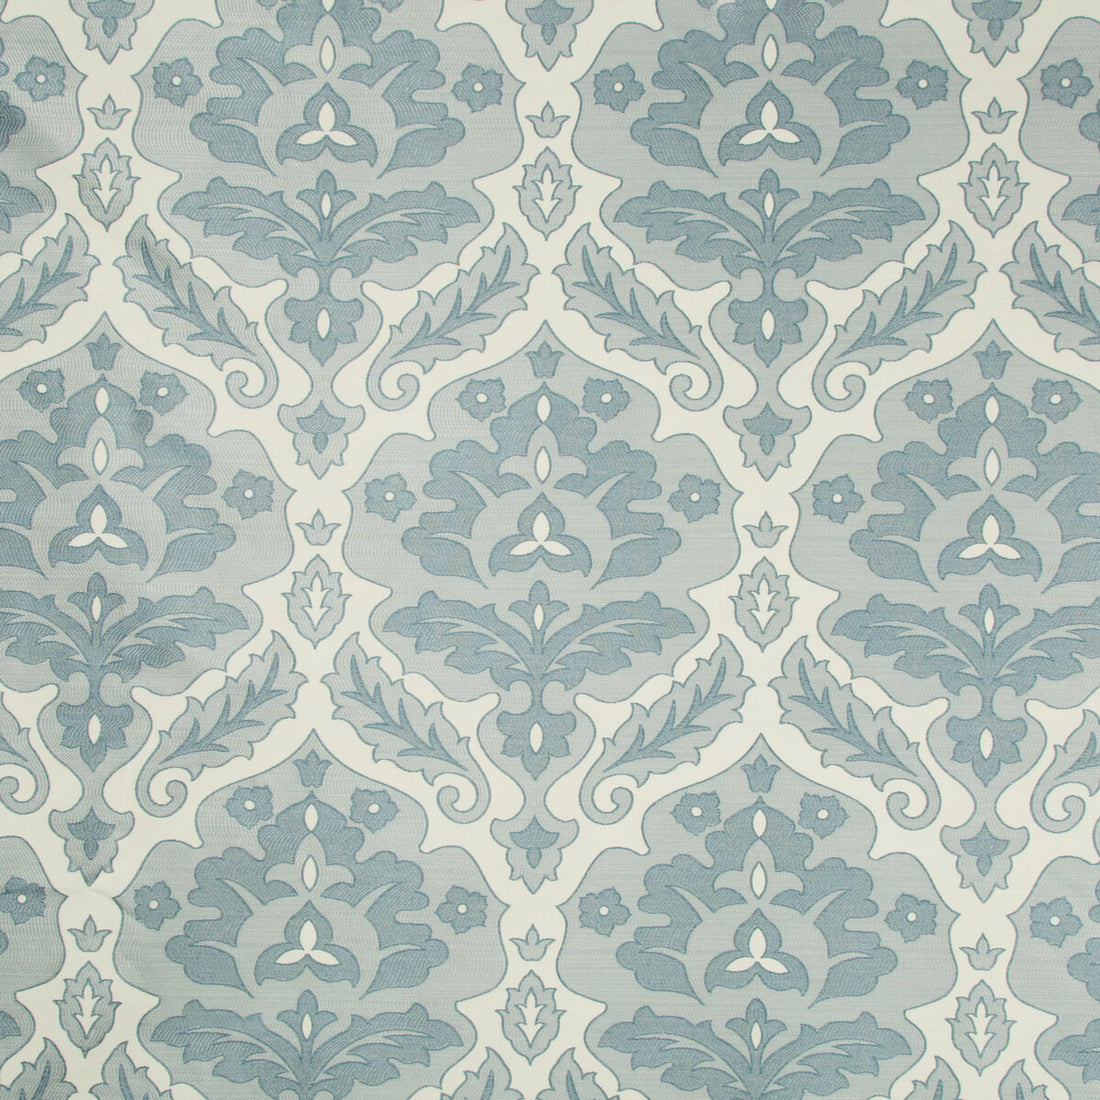 Kravet Contract fabric in 34773-5 color - pattern 34773.5.0 - by Kravet Contract in the Crypton Incase collection